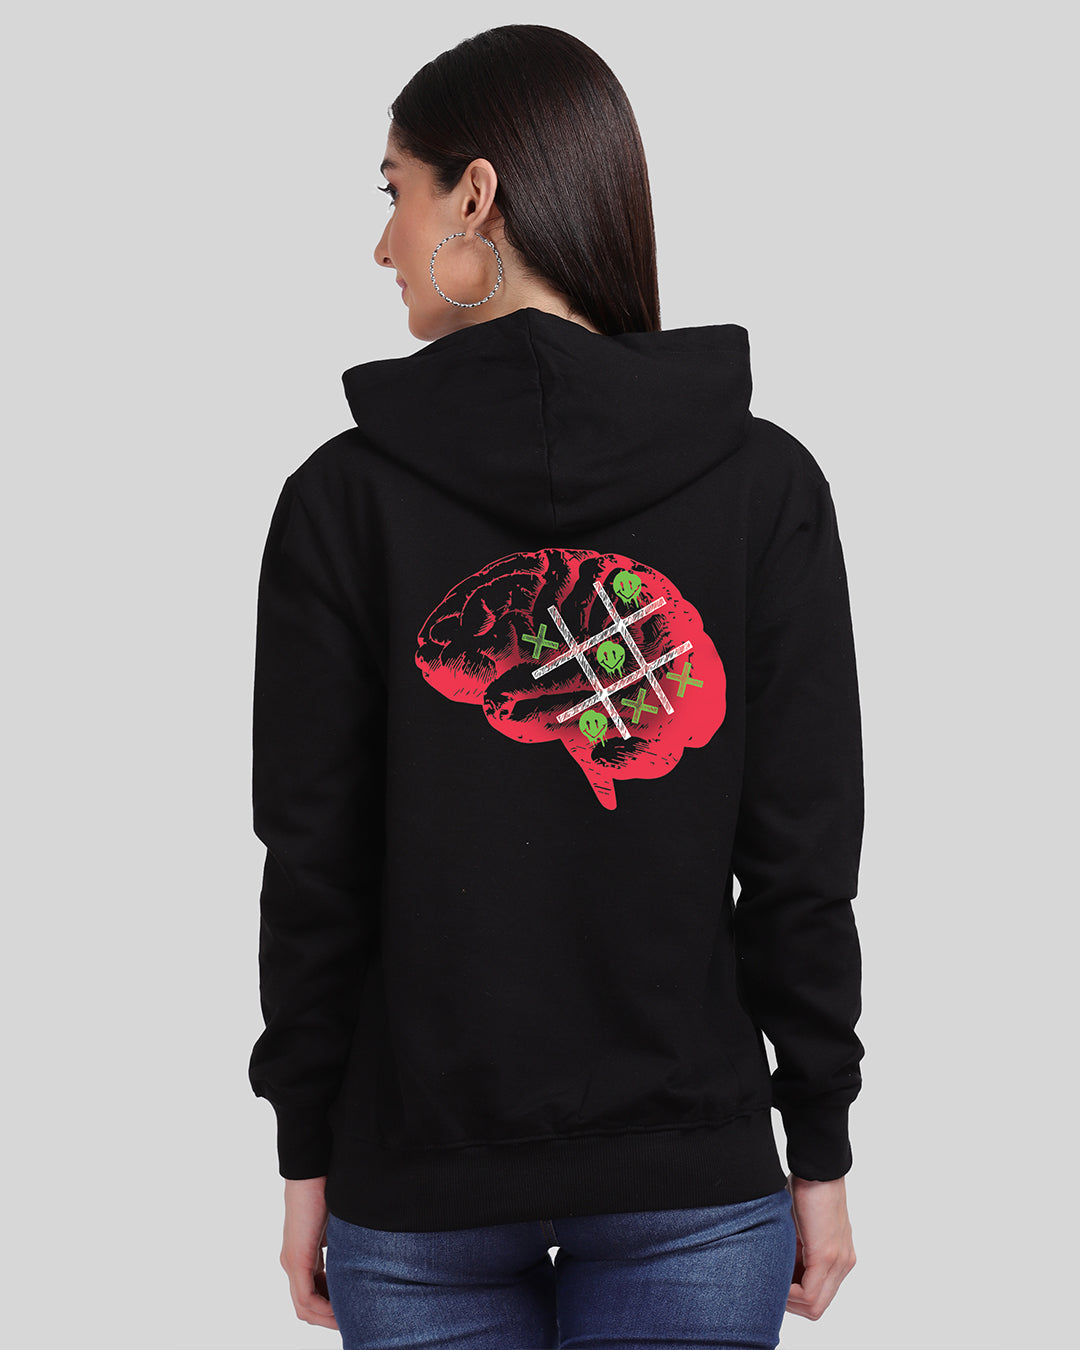 Don't Play With Mind Streetwear Women Hoodie